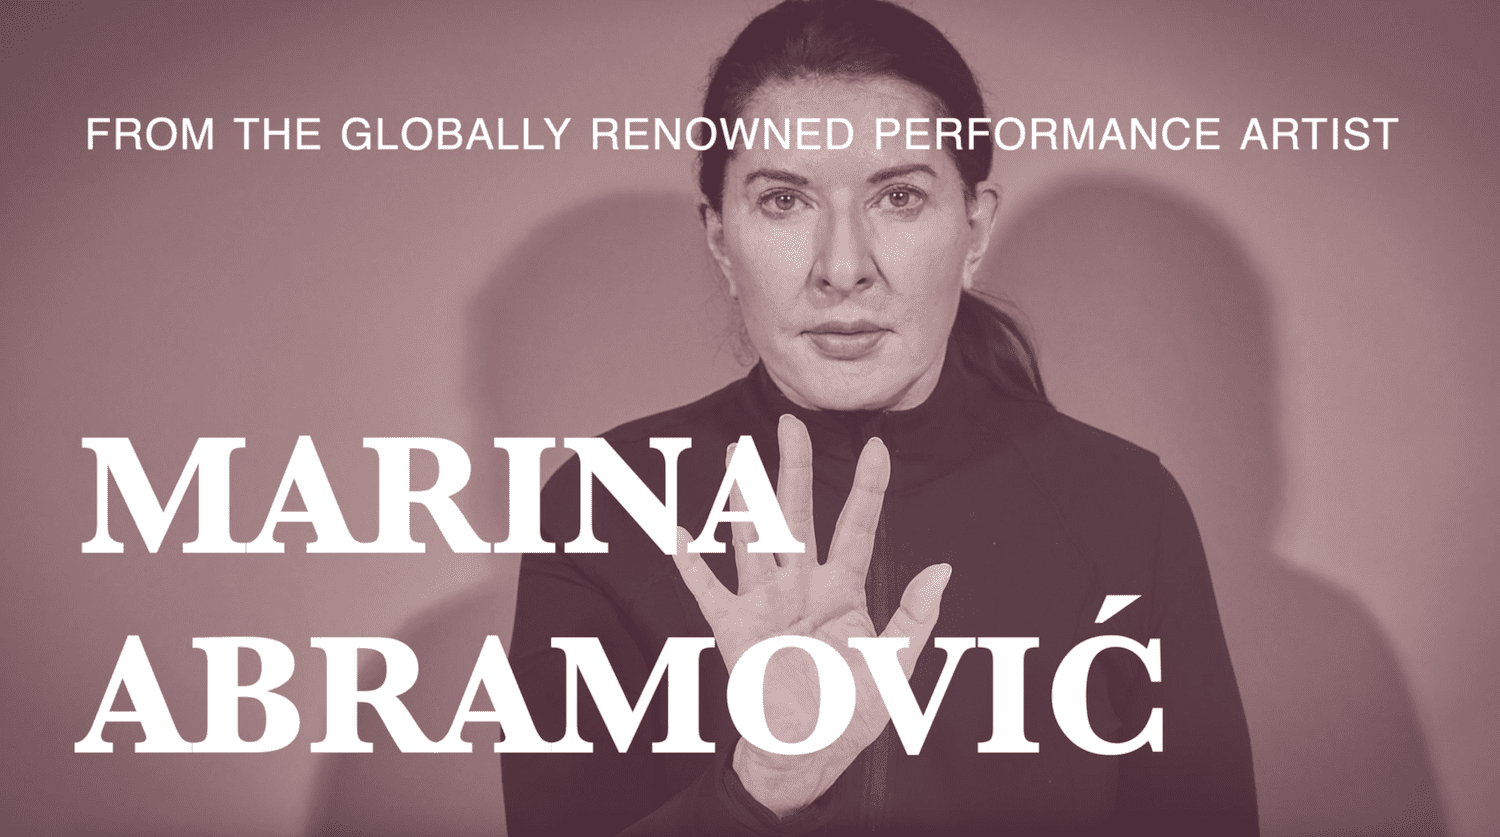 Photo of Marina Abramovic with her palm held up facing outwards. Text over the image reads 'From the globally renowned performance artist Marina Abramovic'